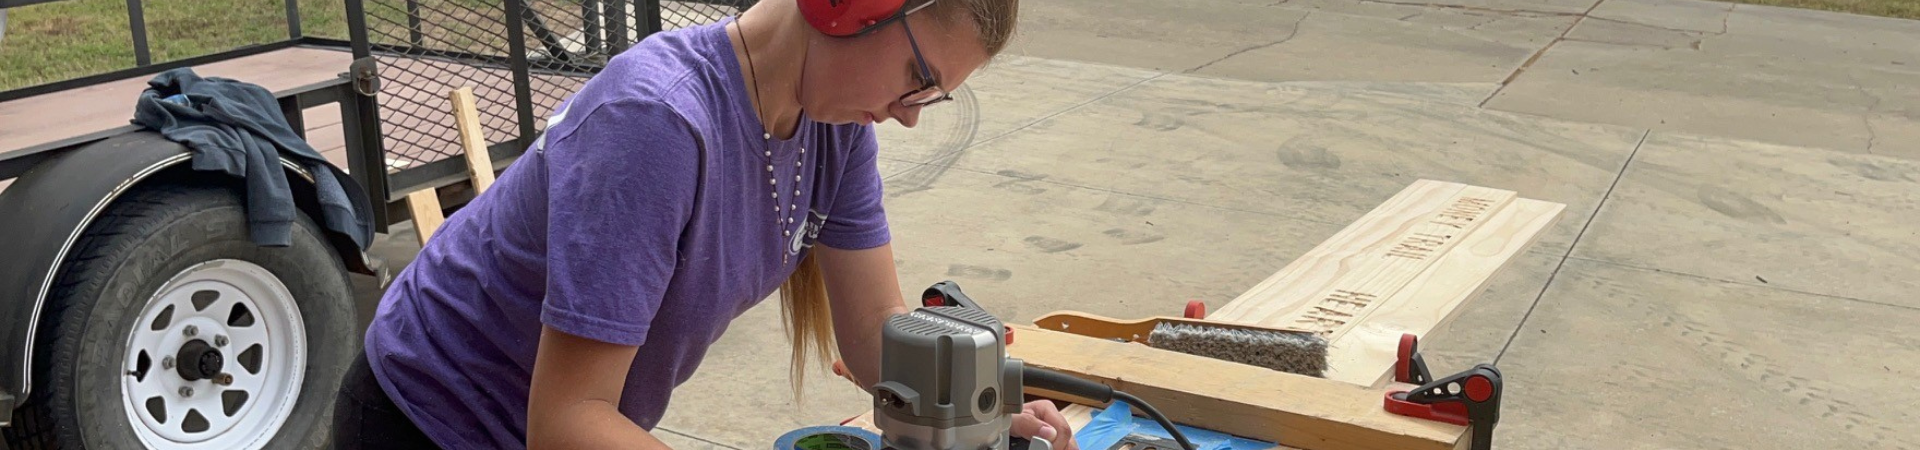  girl using a router on a woodworking project 